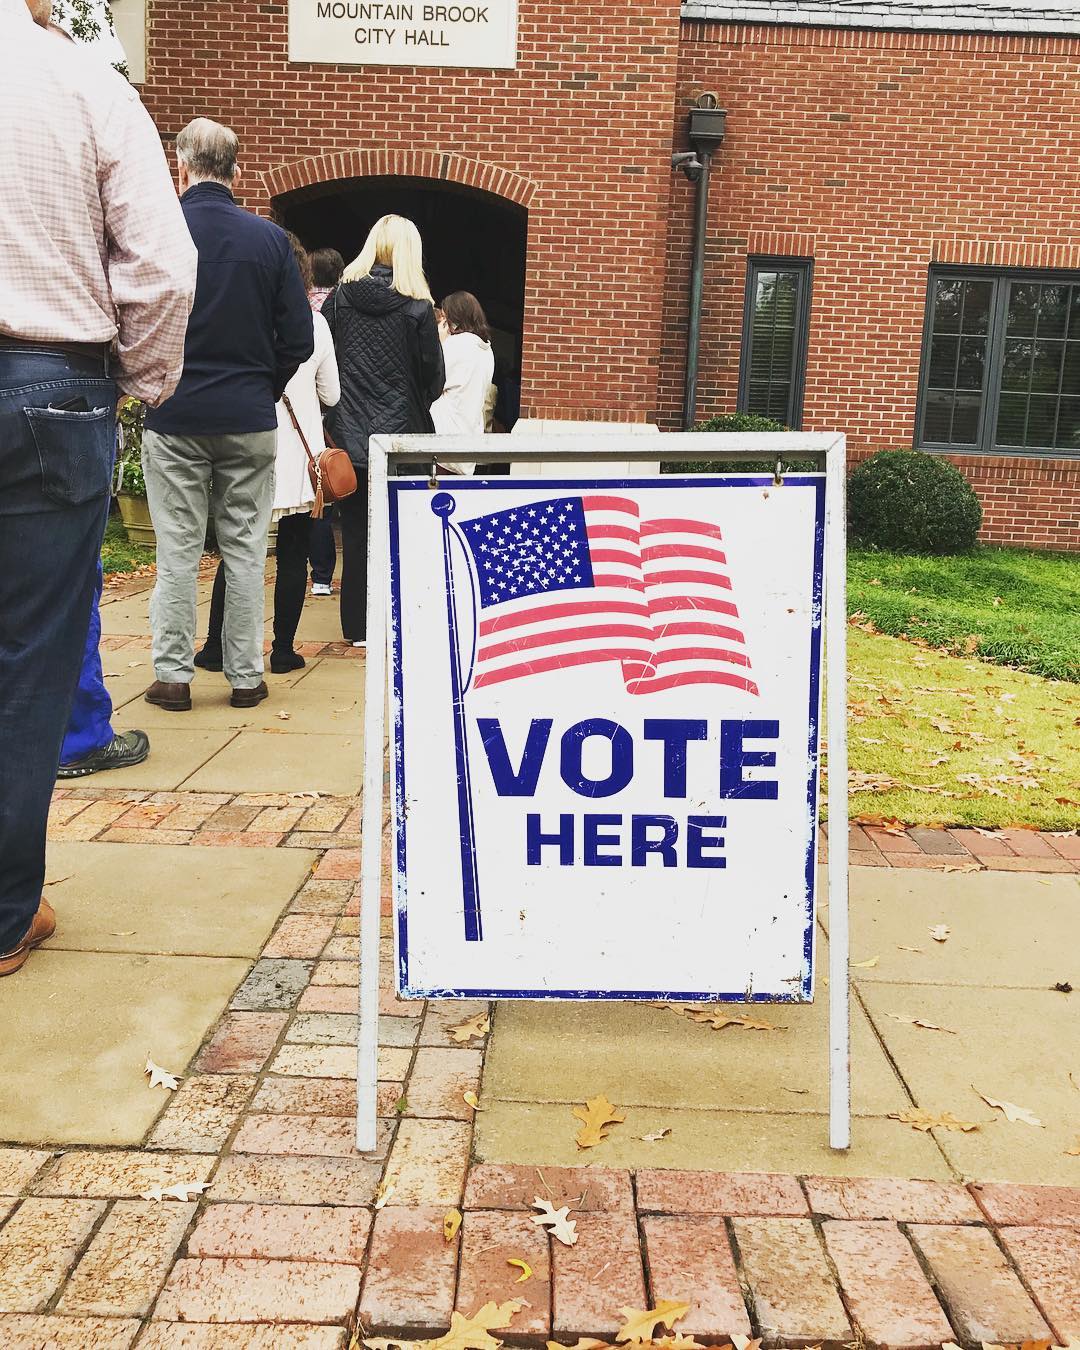 People standing in line at voting building. Photo by Instagram user @bhamnow